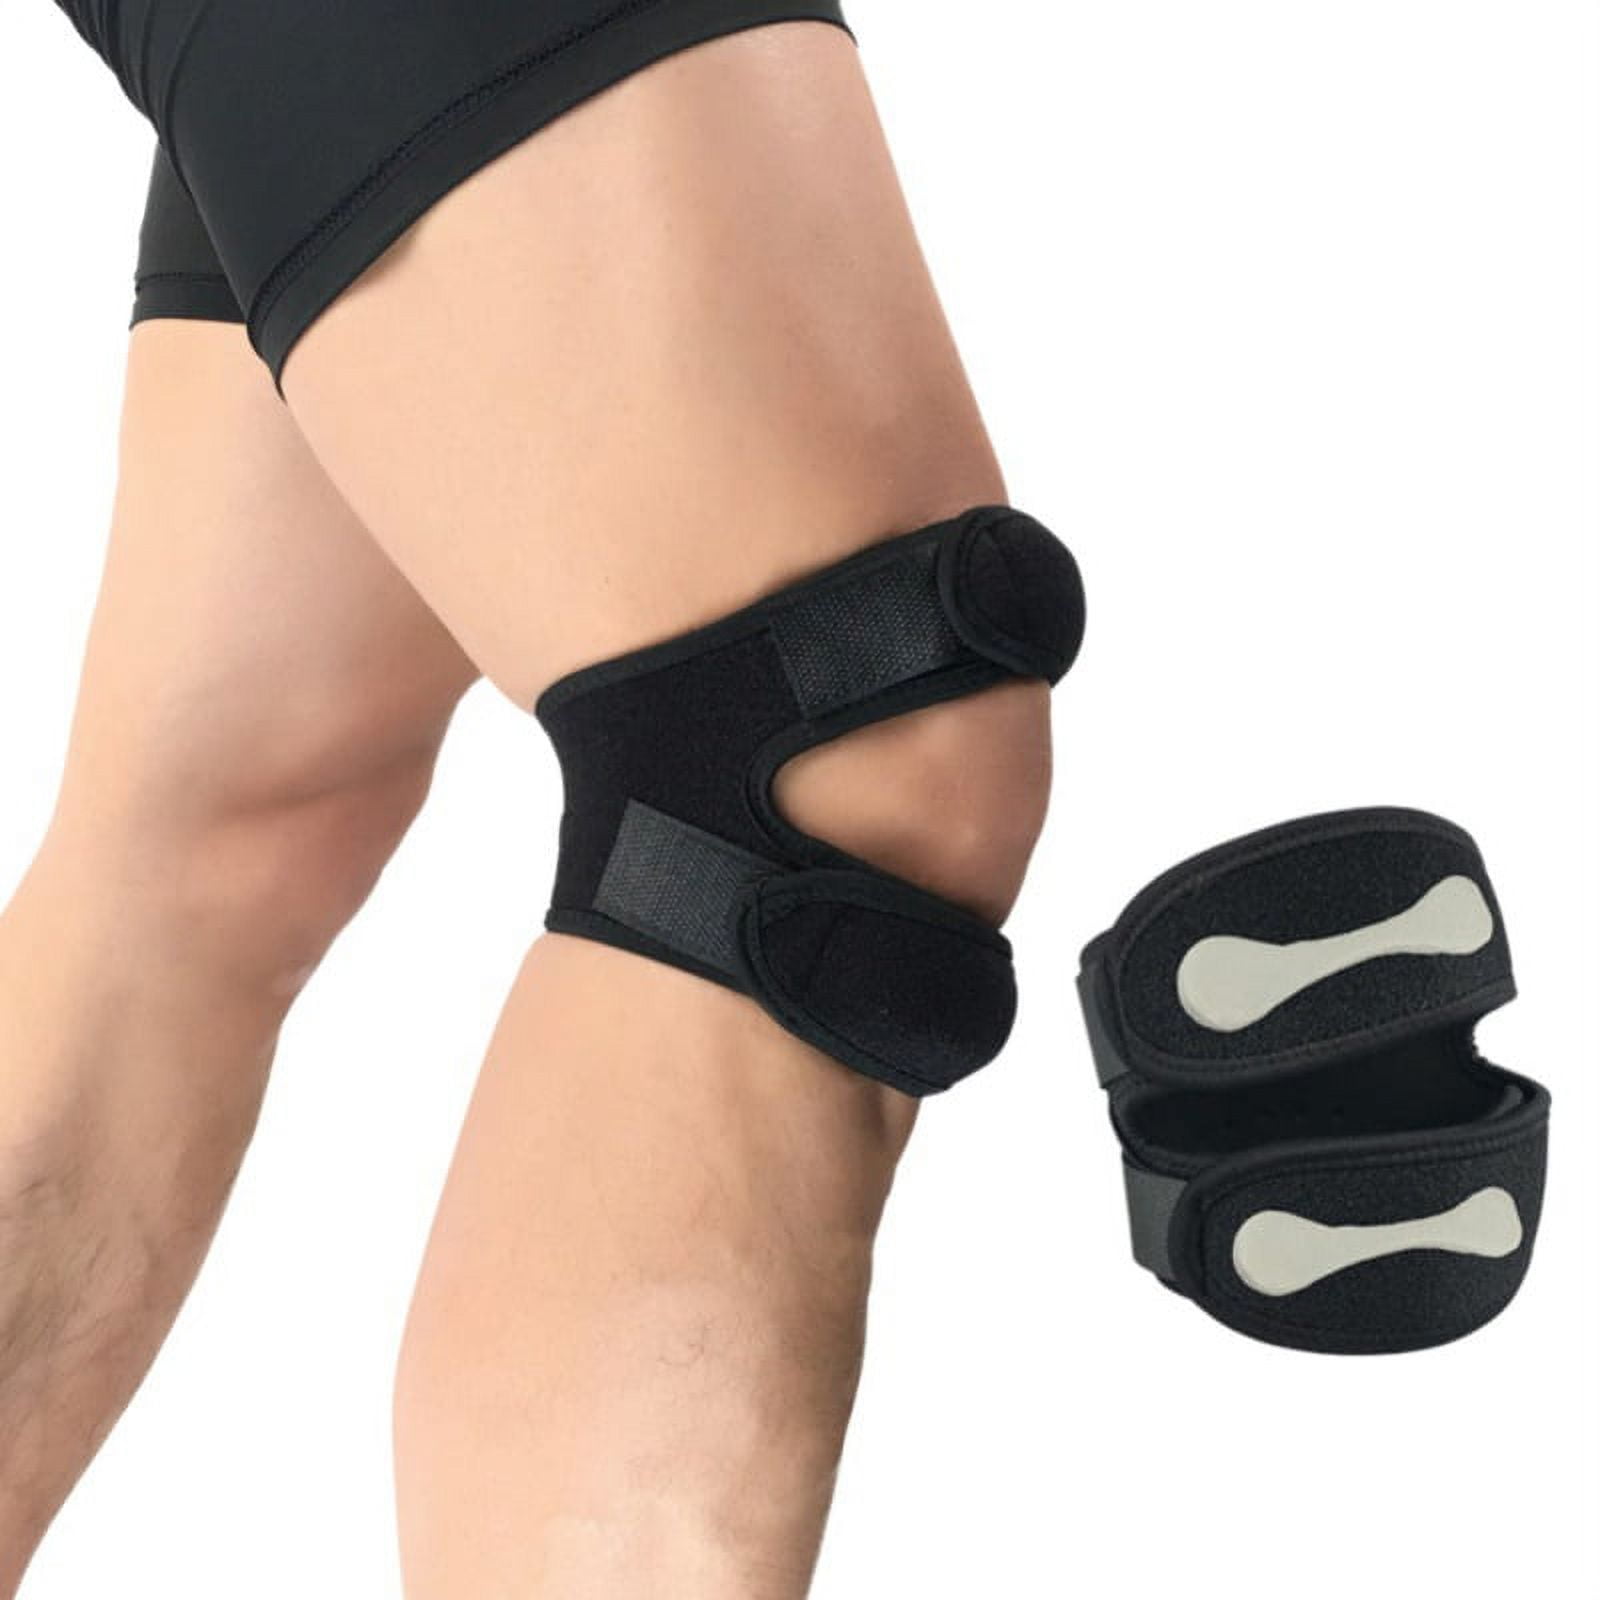 Knee Brace Knee Sleeve For Arthritis Swellings And Sports Knee Support For  Compression Walking Injuries Acl Joint Pain Knee Brace For Running M